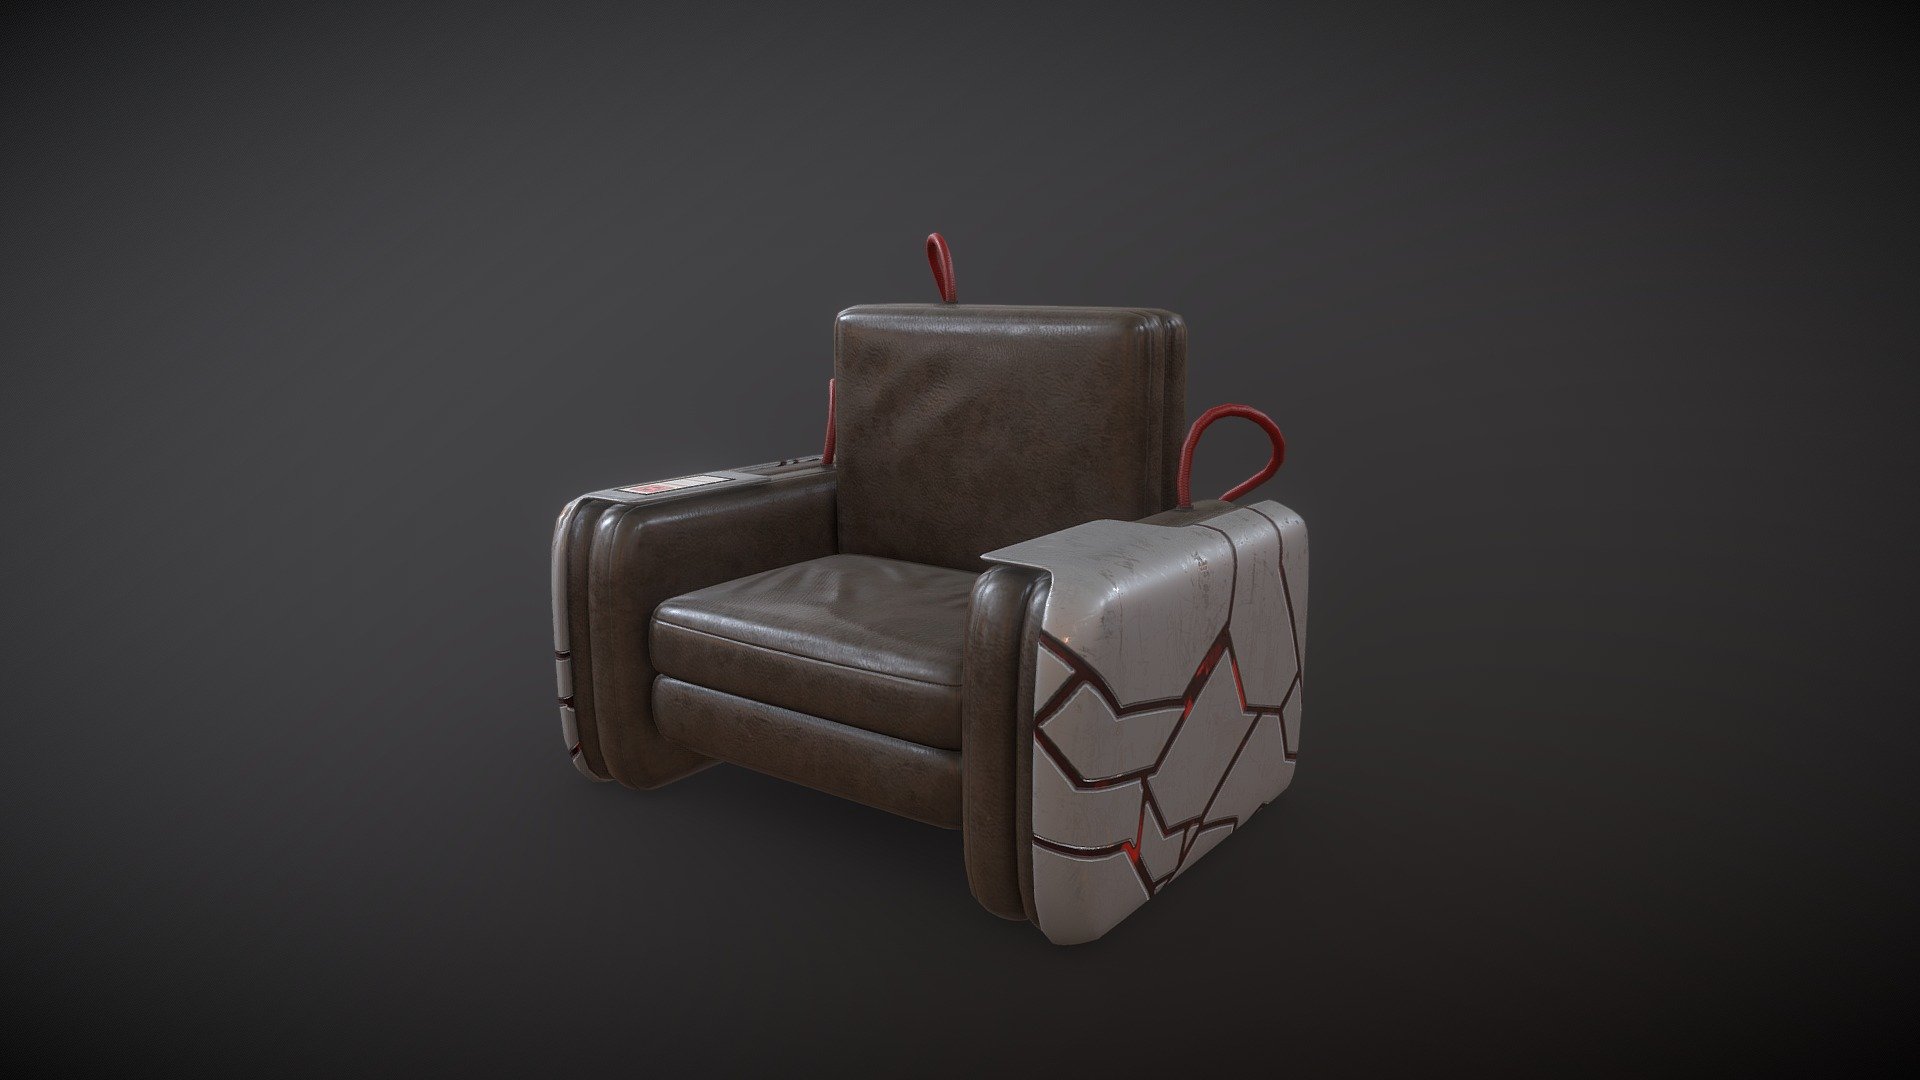 Cyberpunk Self Pumping ArmchAIR

Made by me in Blender and Substance Painter. 

I was limited to use 1024x1024 textures only 3d model